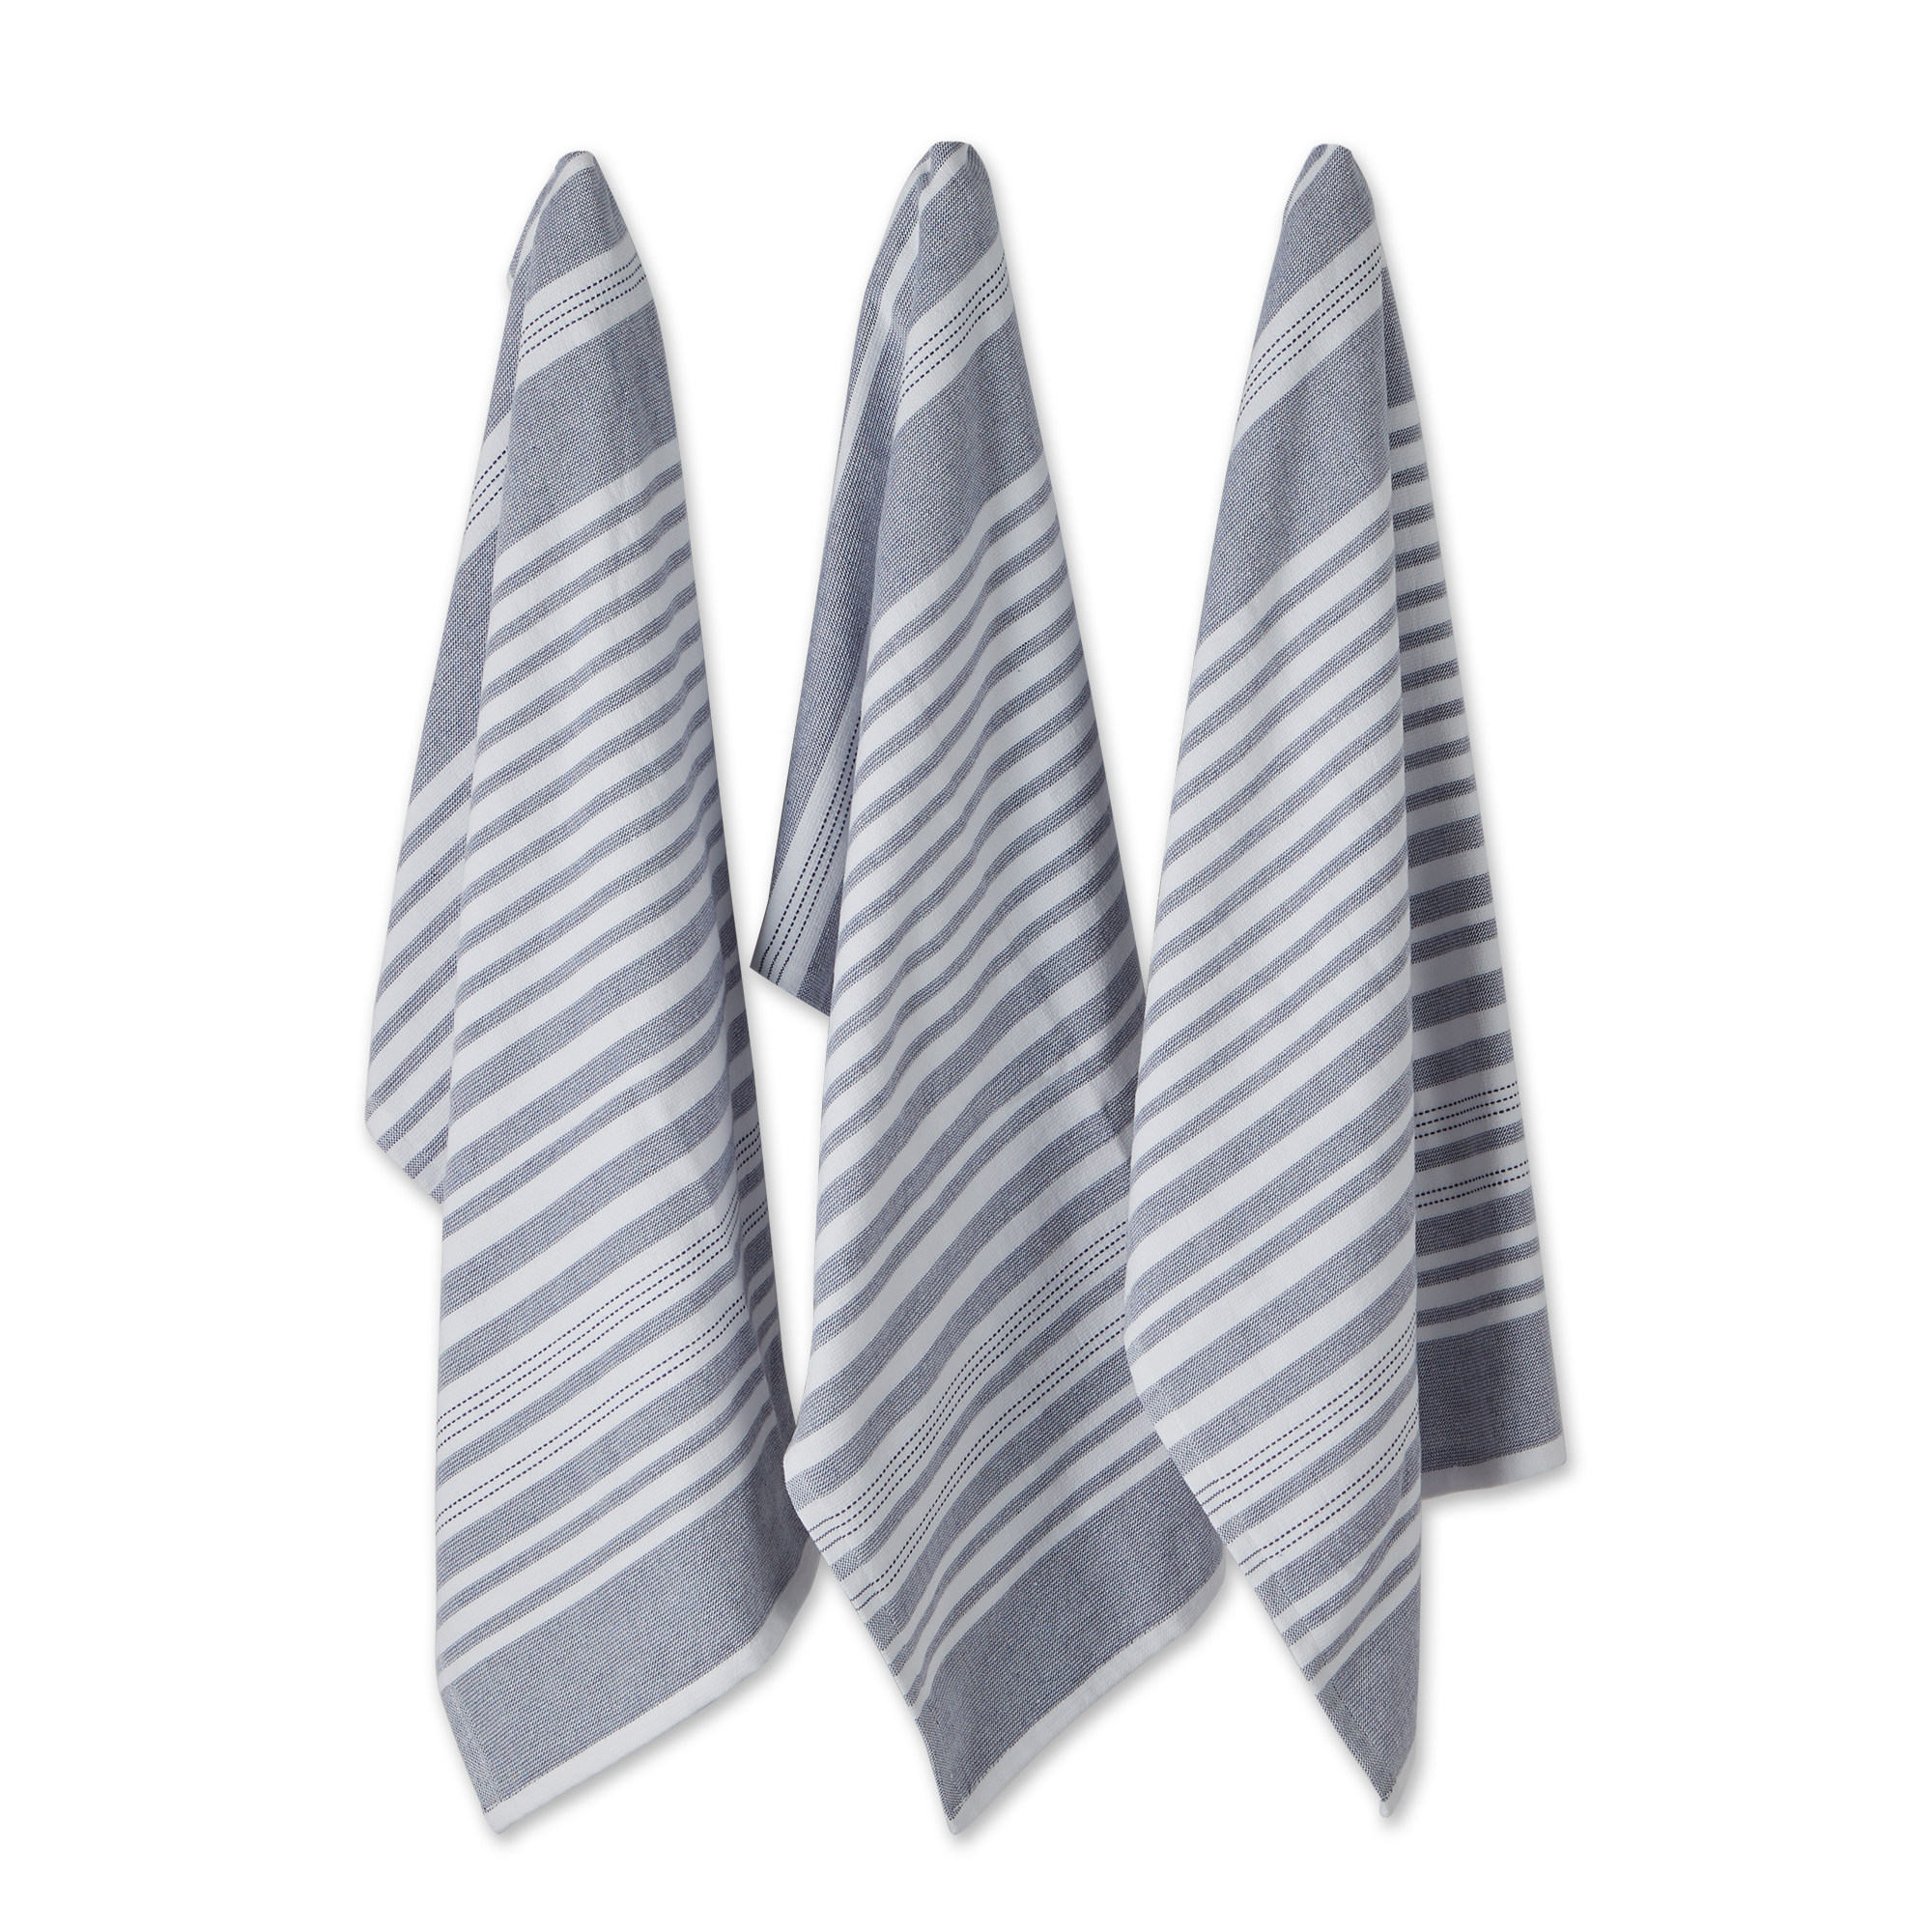 DII FRENCH BLUE FRENCH TERRY VARIEGATED STRIPE DISHTOWEL 3 PIECE